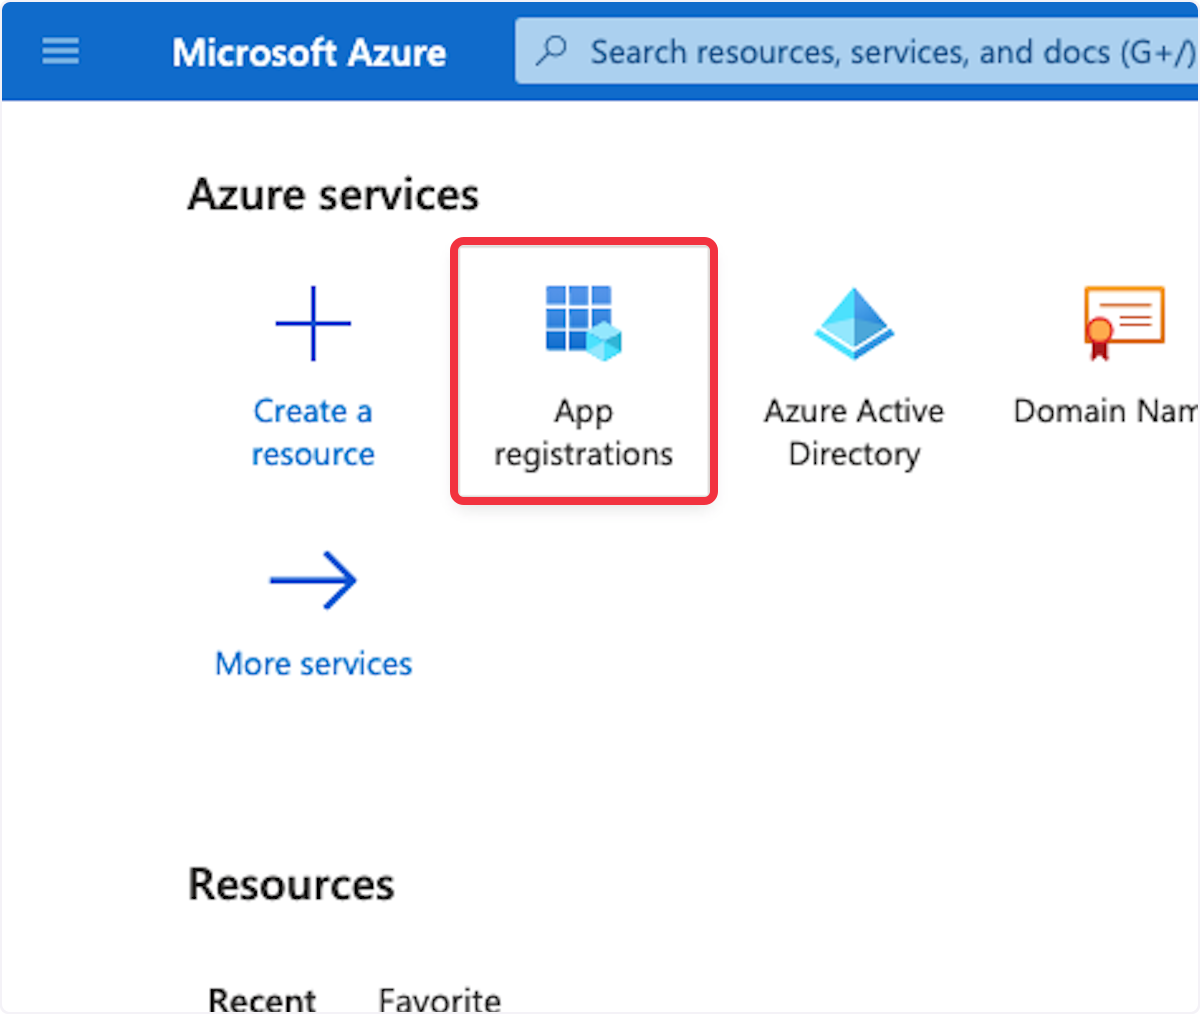 Microsoft Azure dashboard highlighting the 'App registrations' option for setting up new applications.